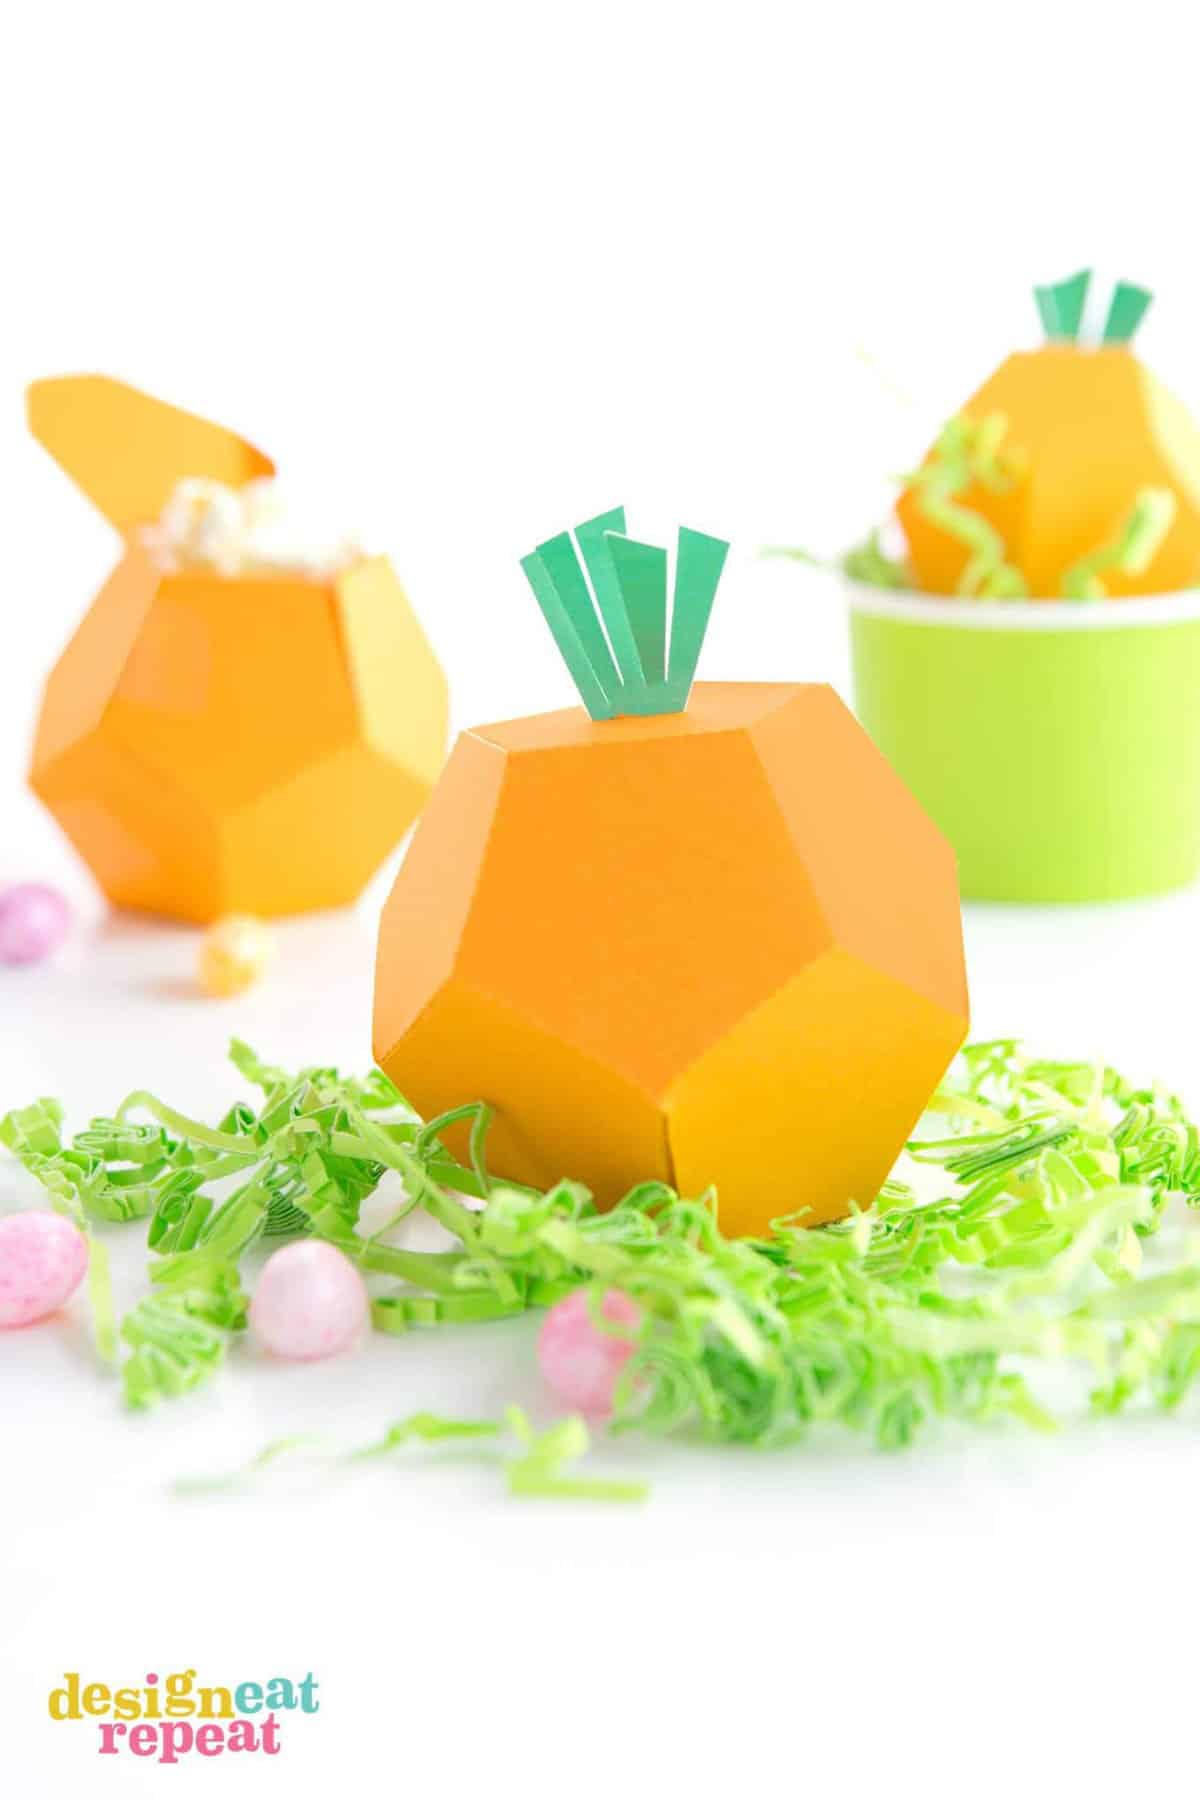 Download these printable carrot treat boxes, fill with candy, and have yourself an adorable little treat for Easter or Spring time goodies!